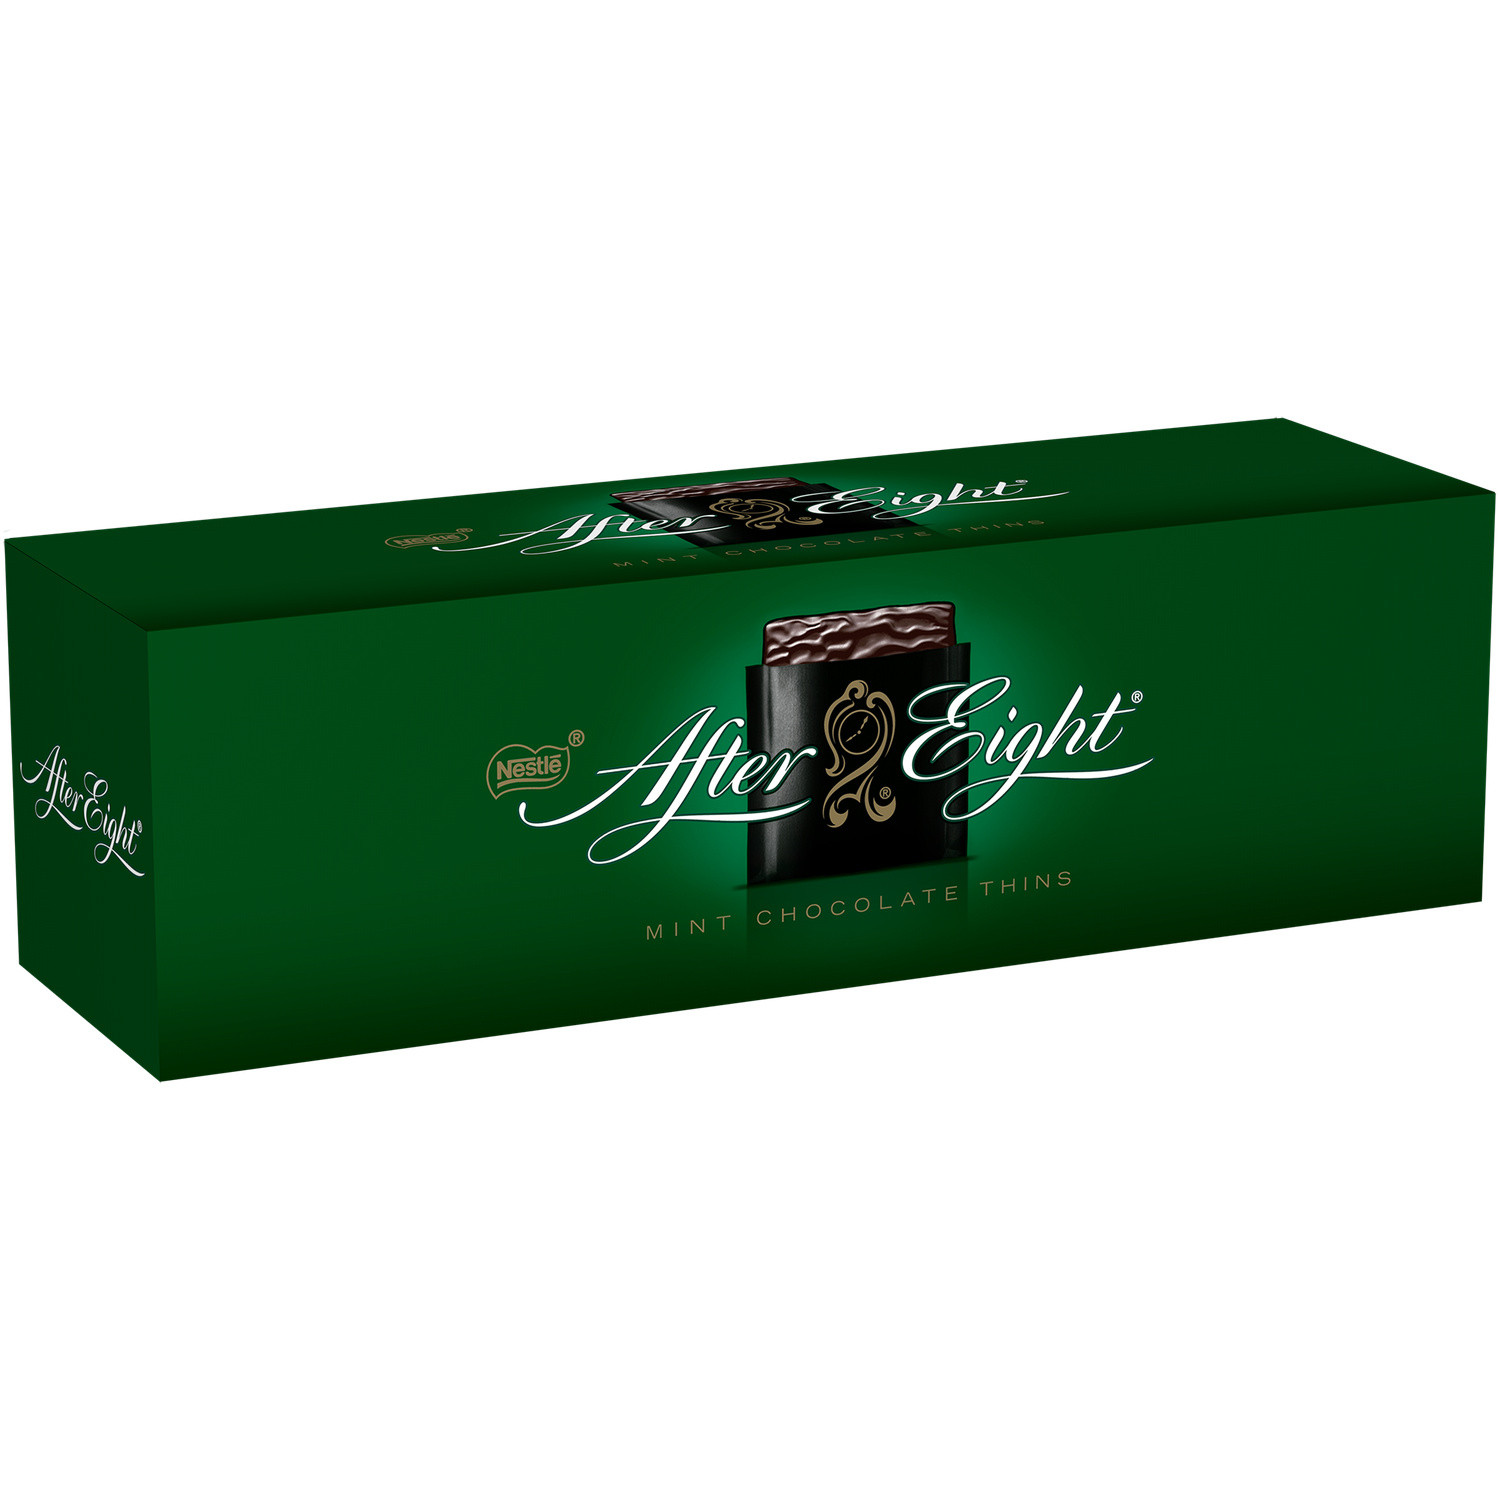 Nestle After Eight Mints 300g – A. B. Snell & Son